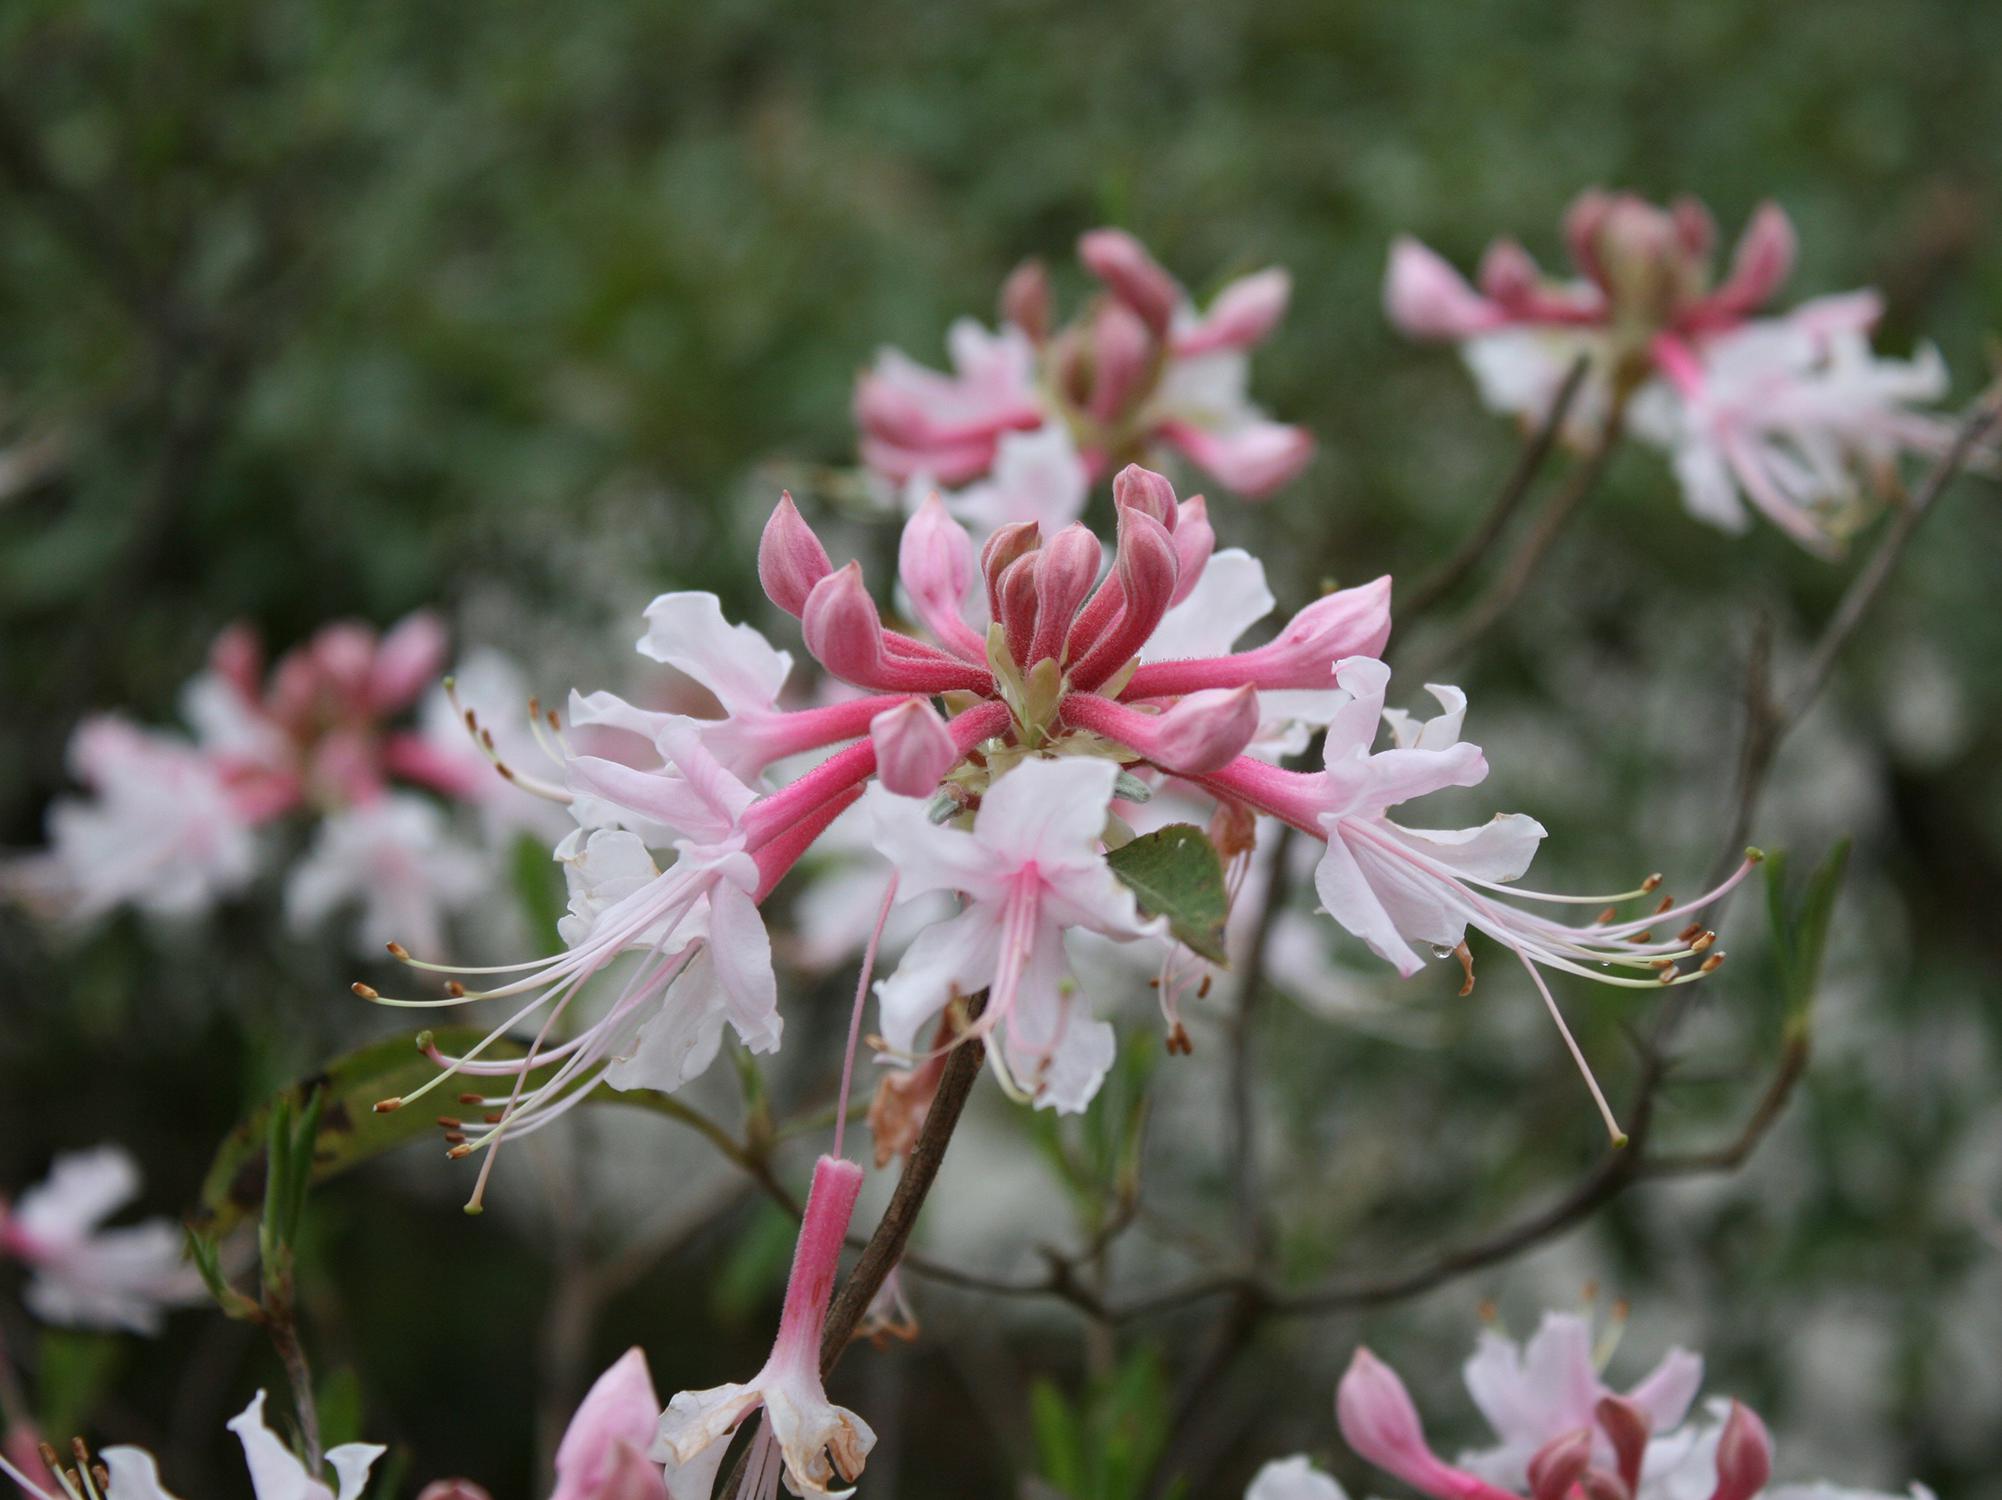 A white and pink honeysuckle flower floats in the foreground with green foliage in the back.